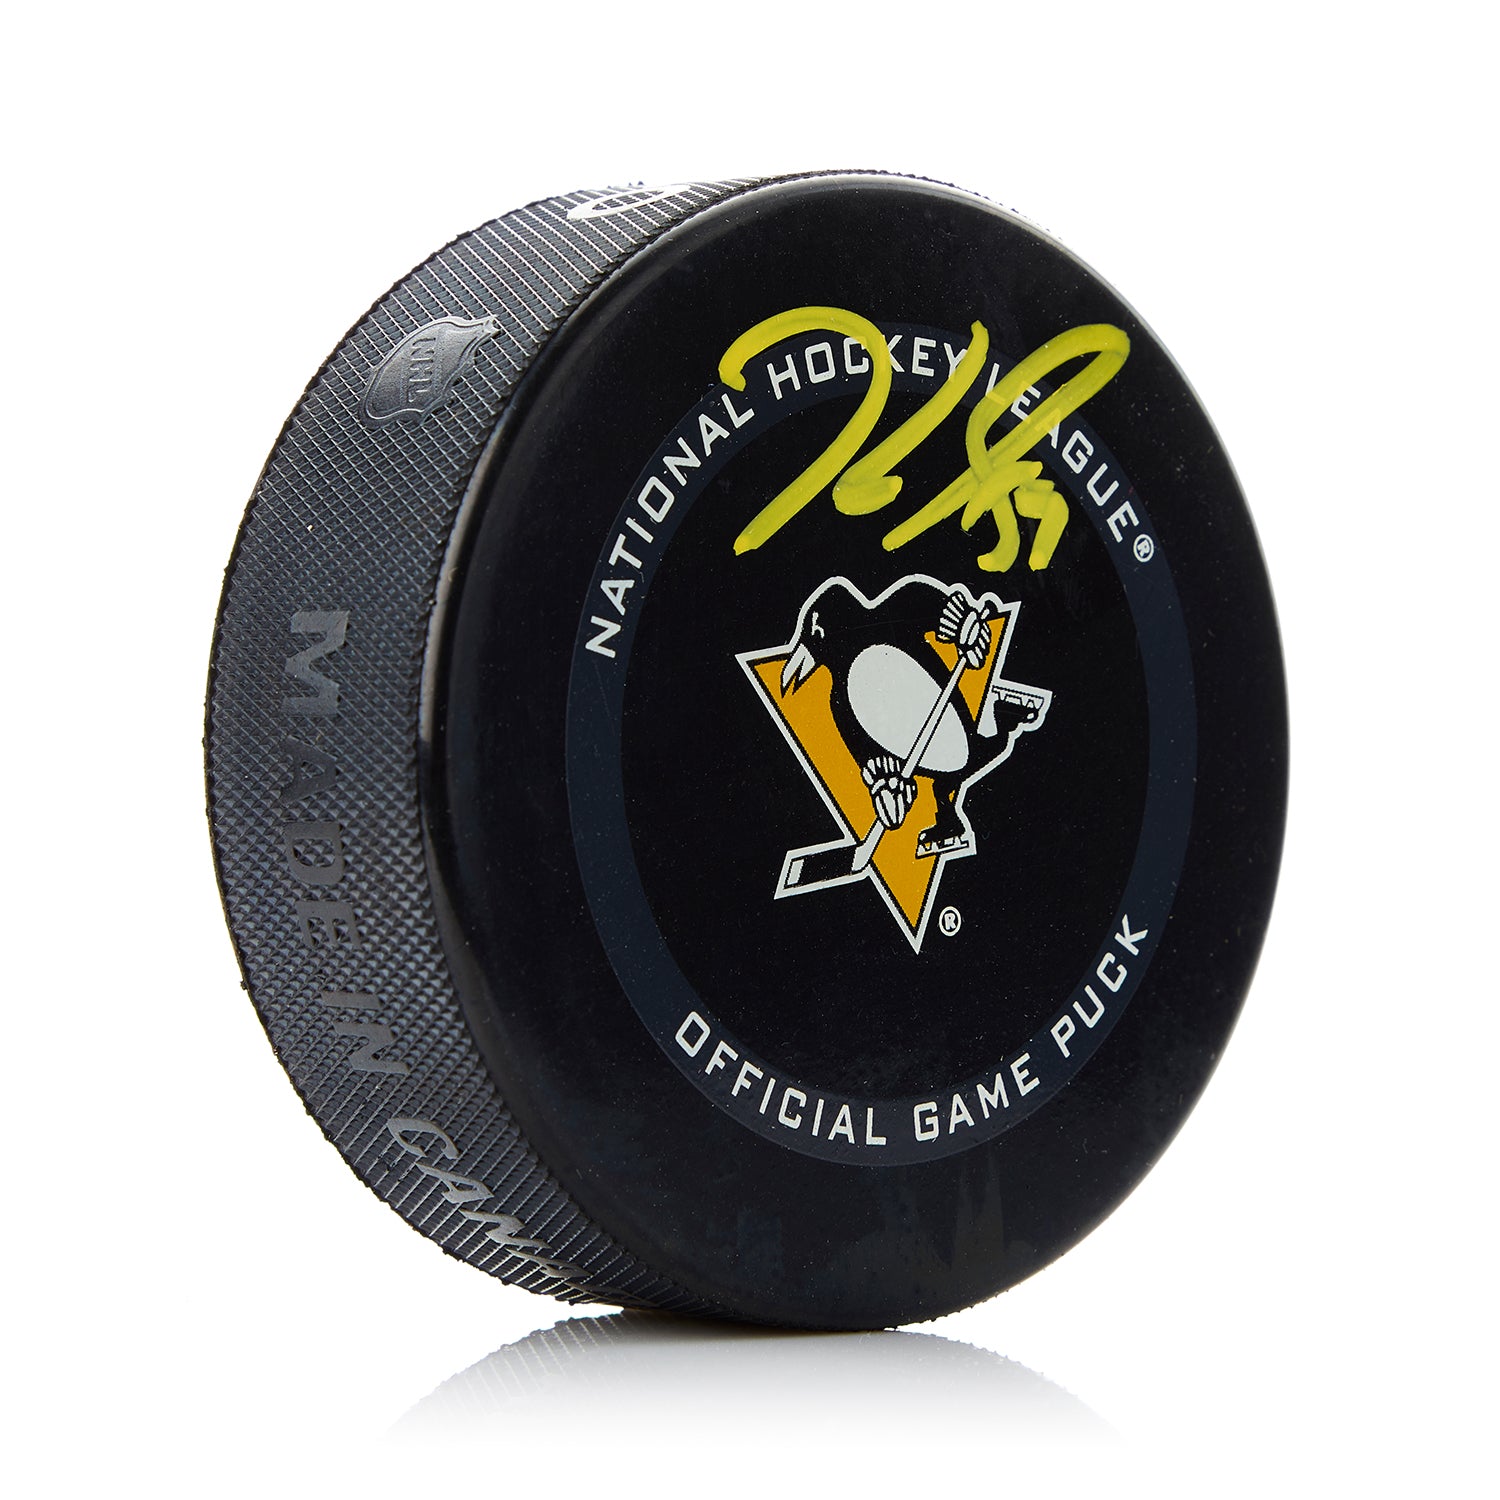 Jake Guentzel Autographed Pittsburgh Penguins Official Game Puck